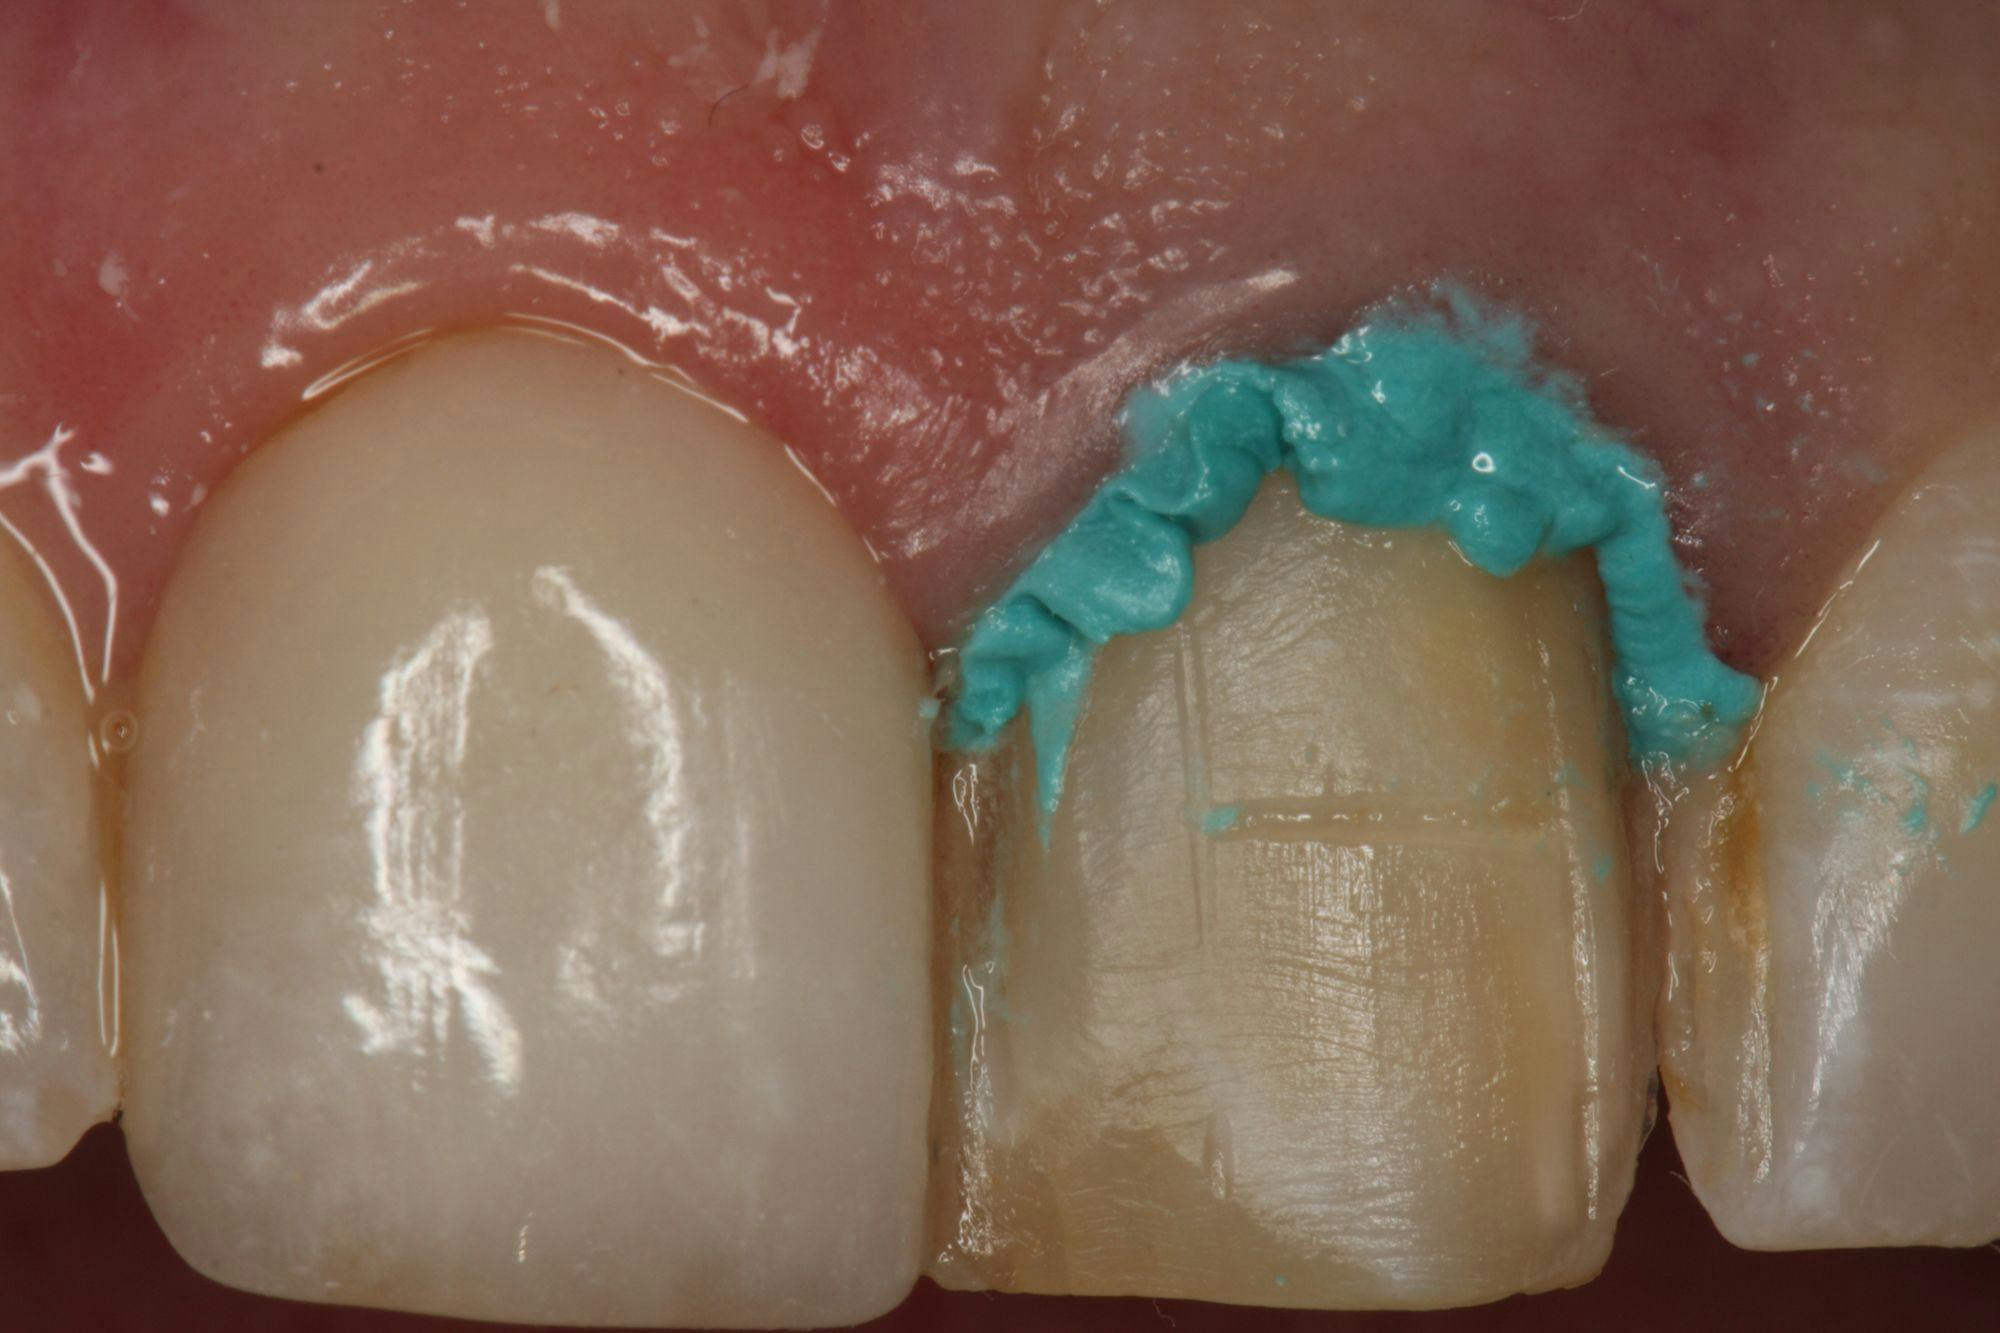 Figure 3. Retraction paste is used to control the gingival irritation caused by temporary restoration.